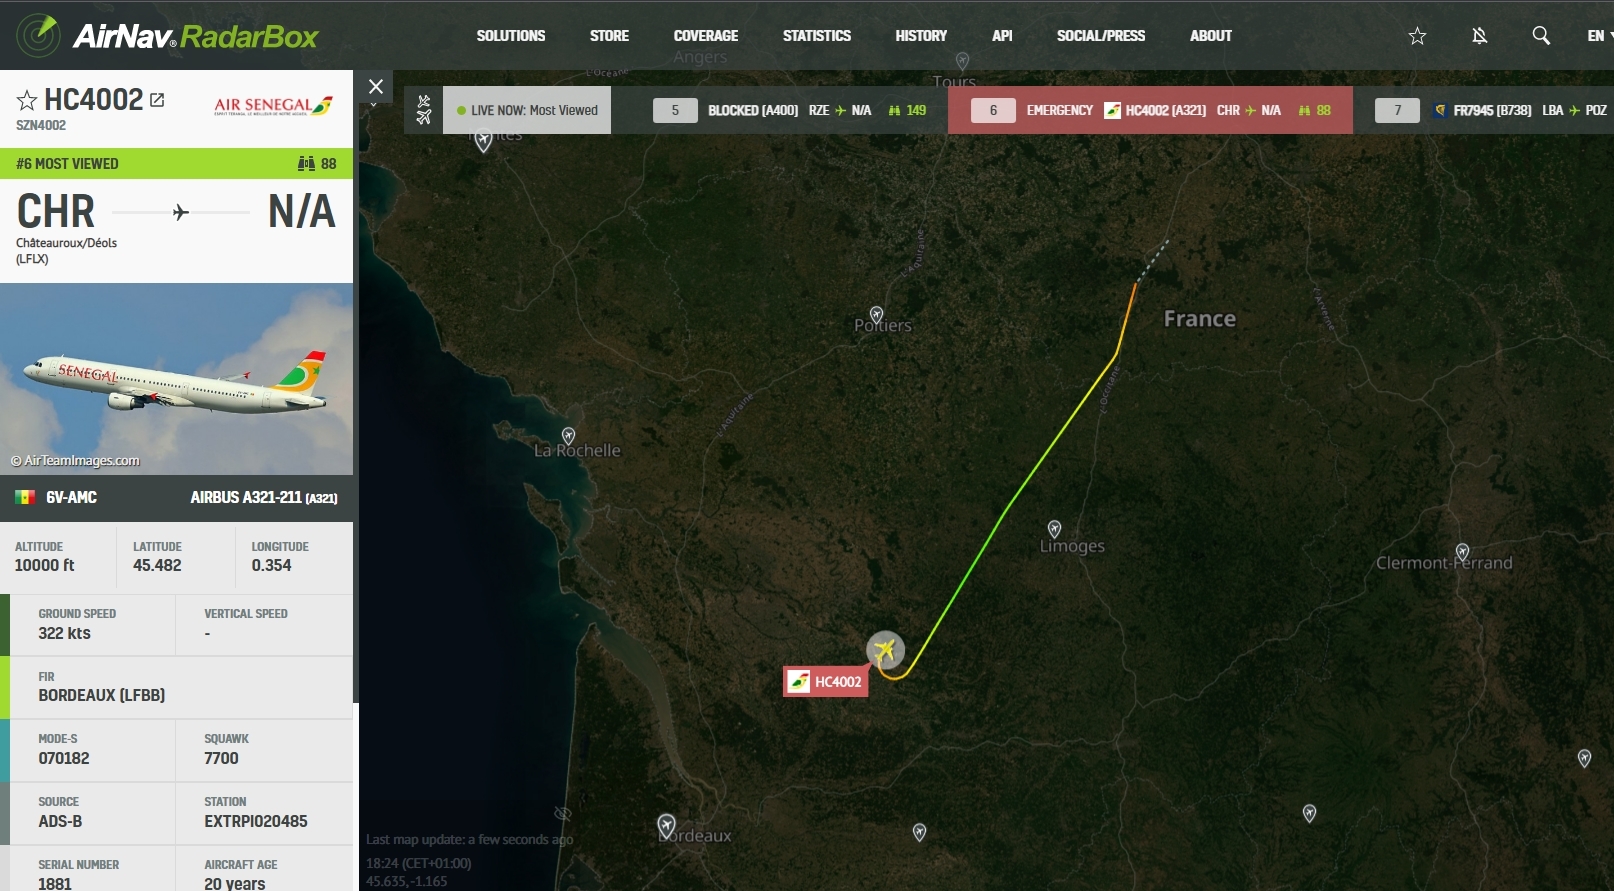 Air Senegal Airbus A321 Declares Emergency over France